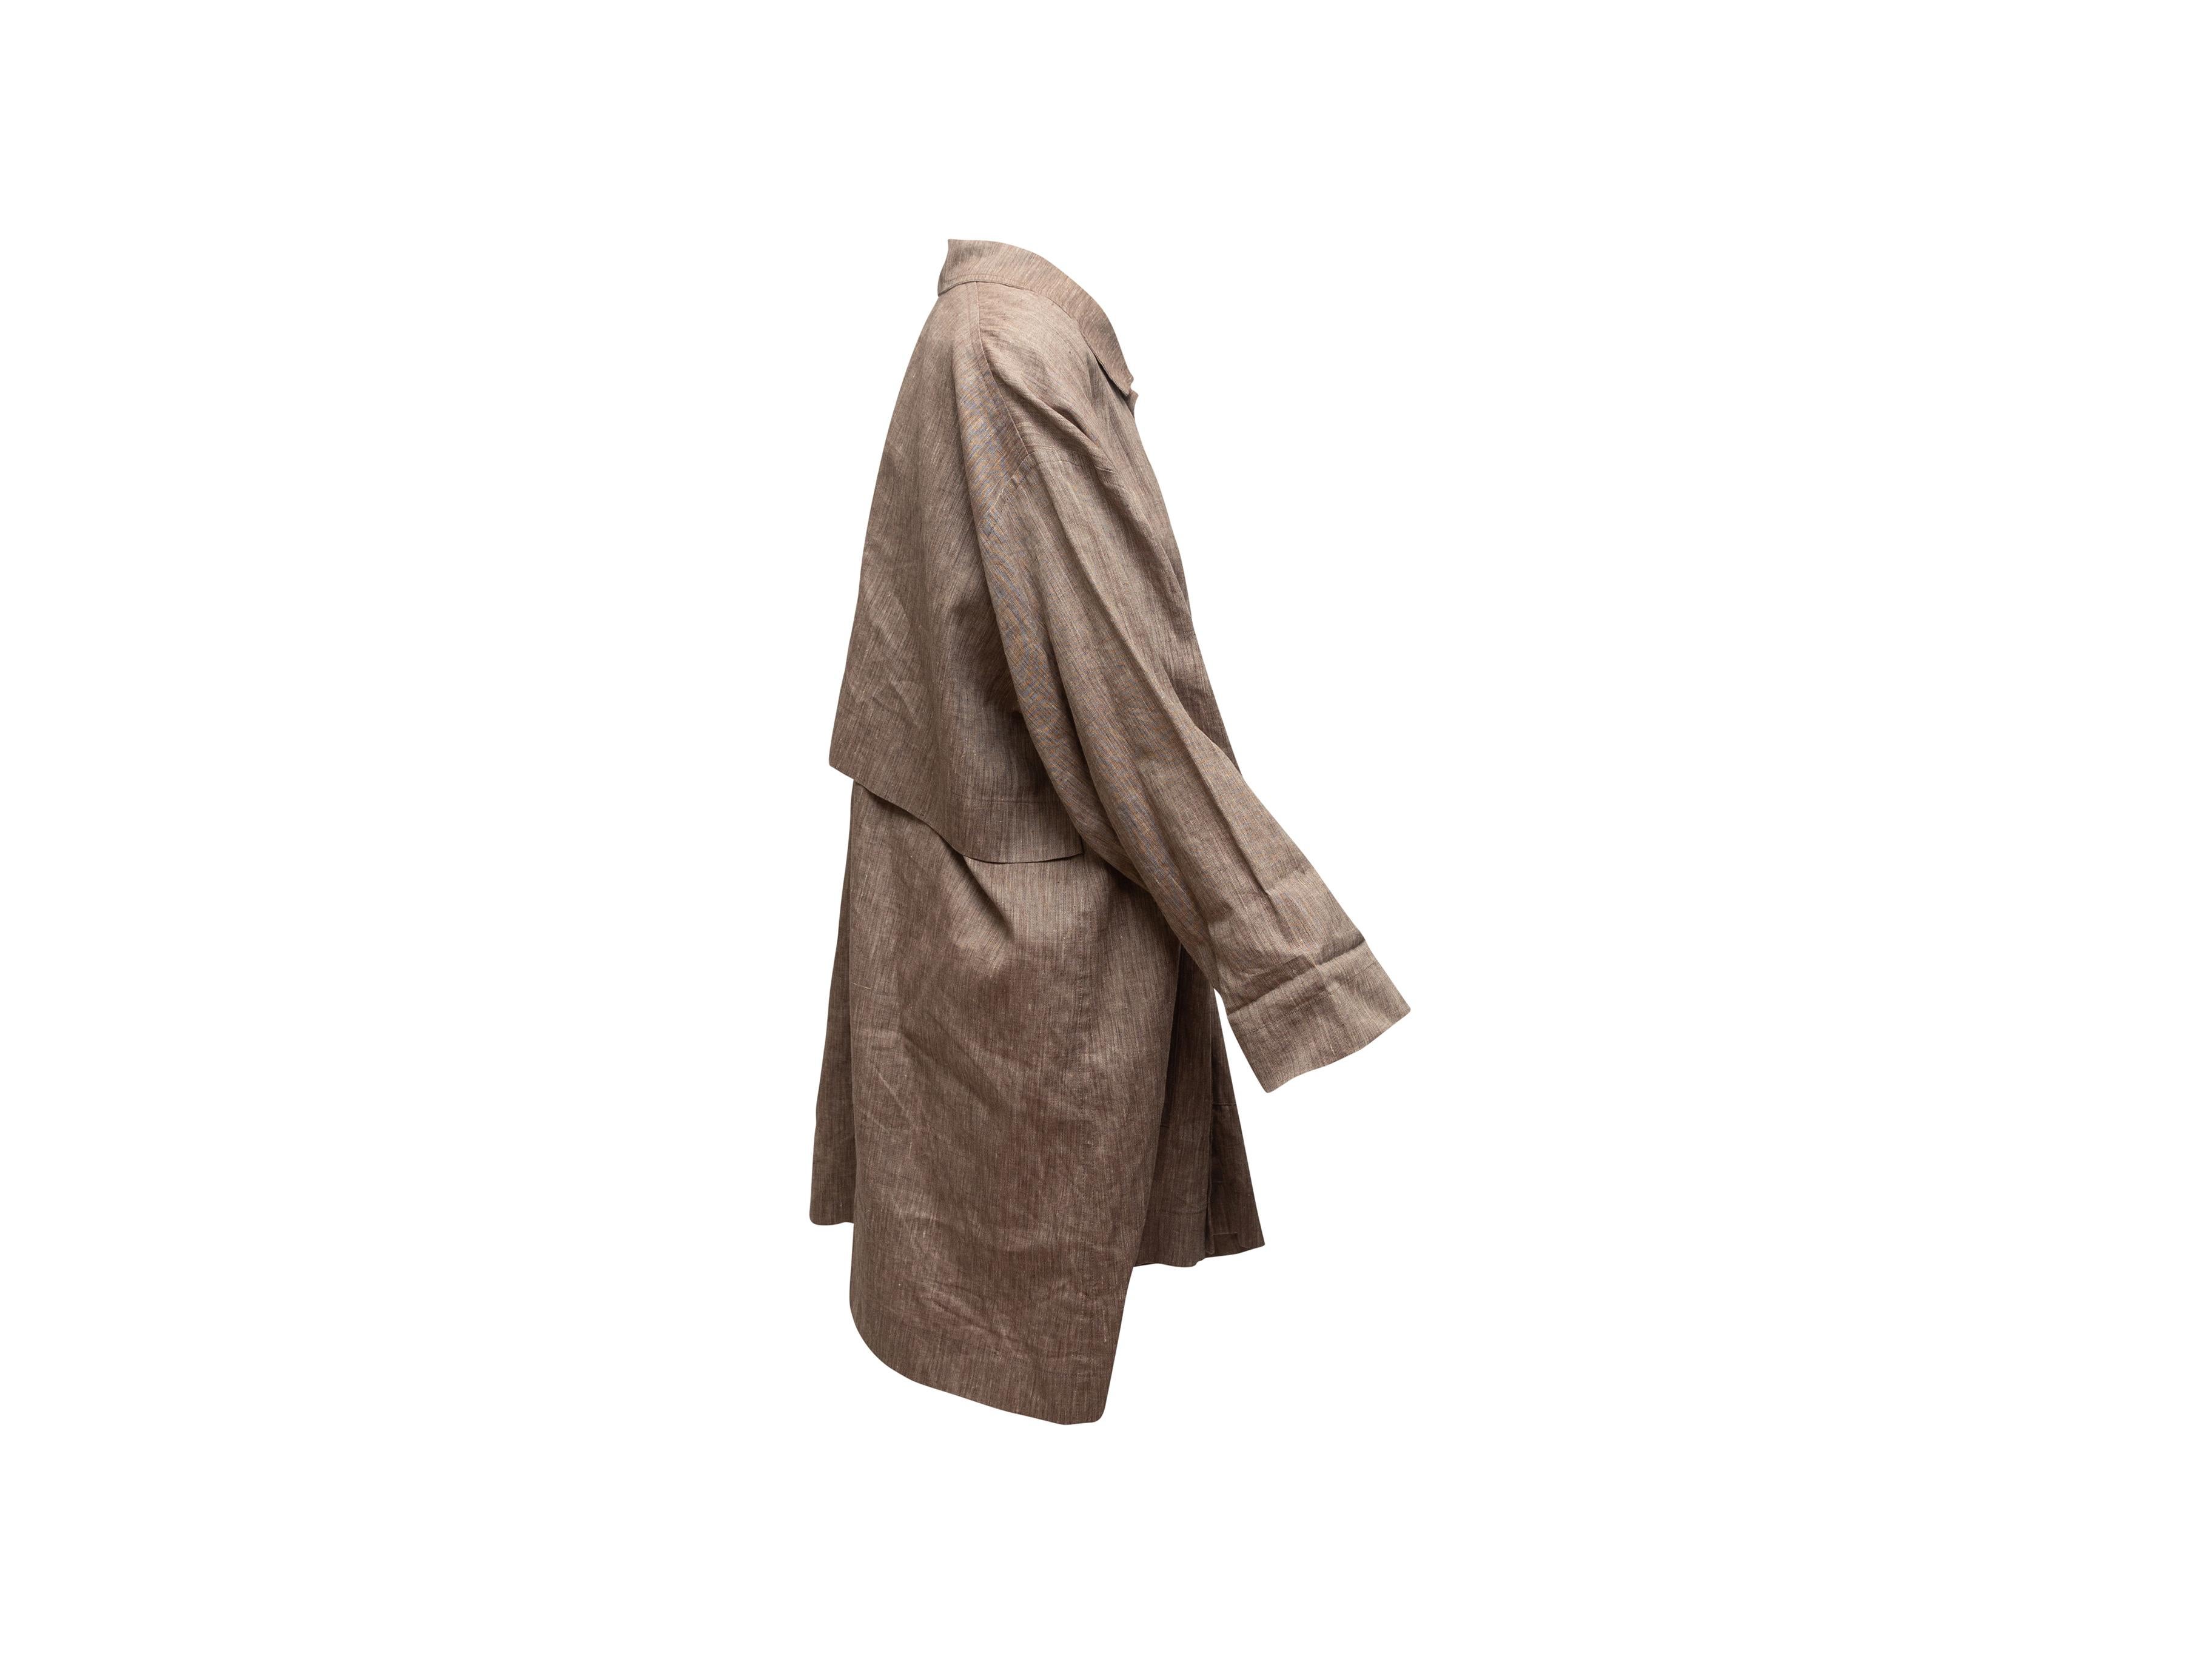 Product details: Light brown linen oversized coat by Eskandar. Pointed collar. Dual flap pockets at hips. Button closures at center front. 54